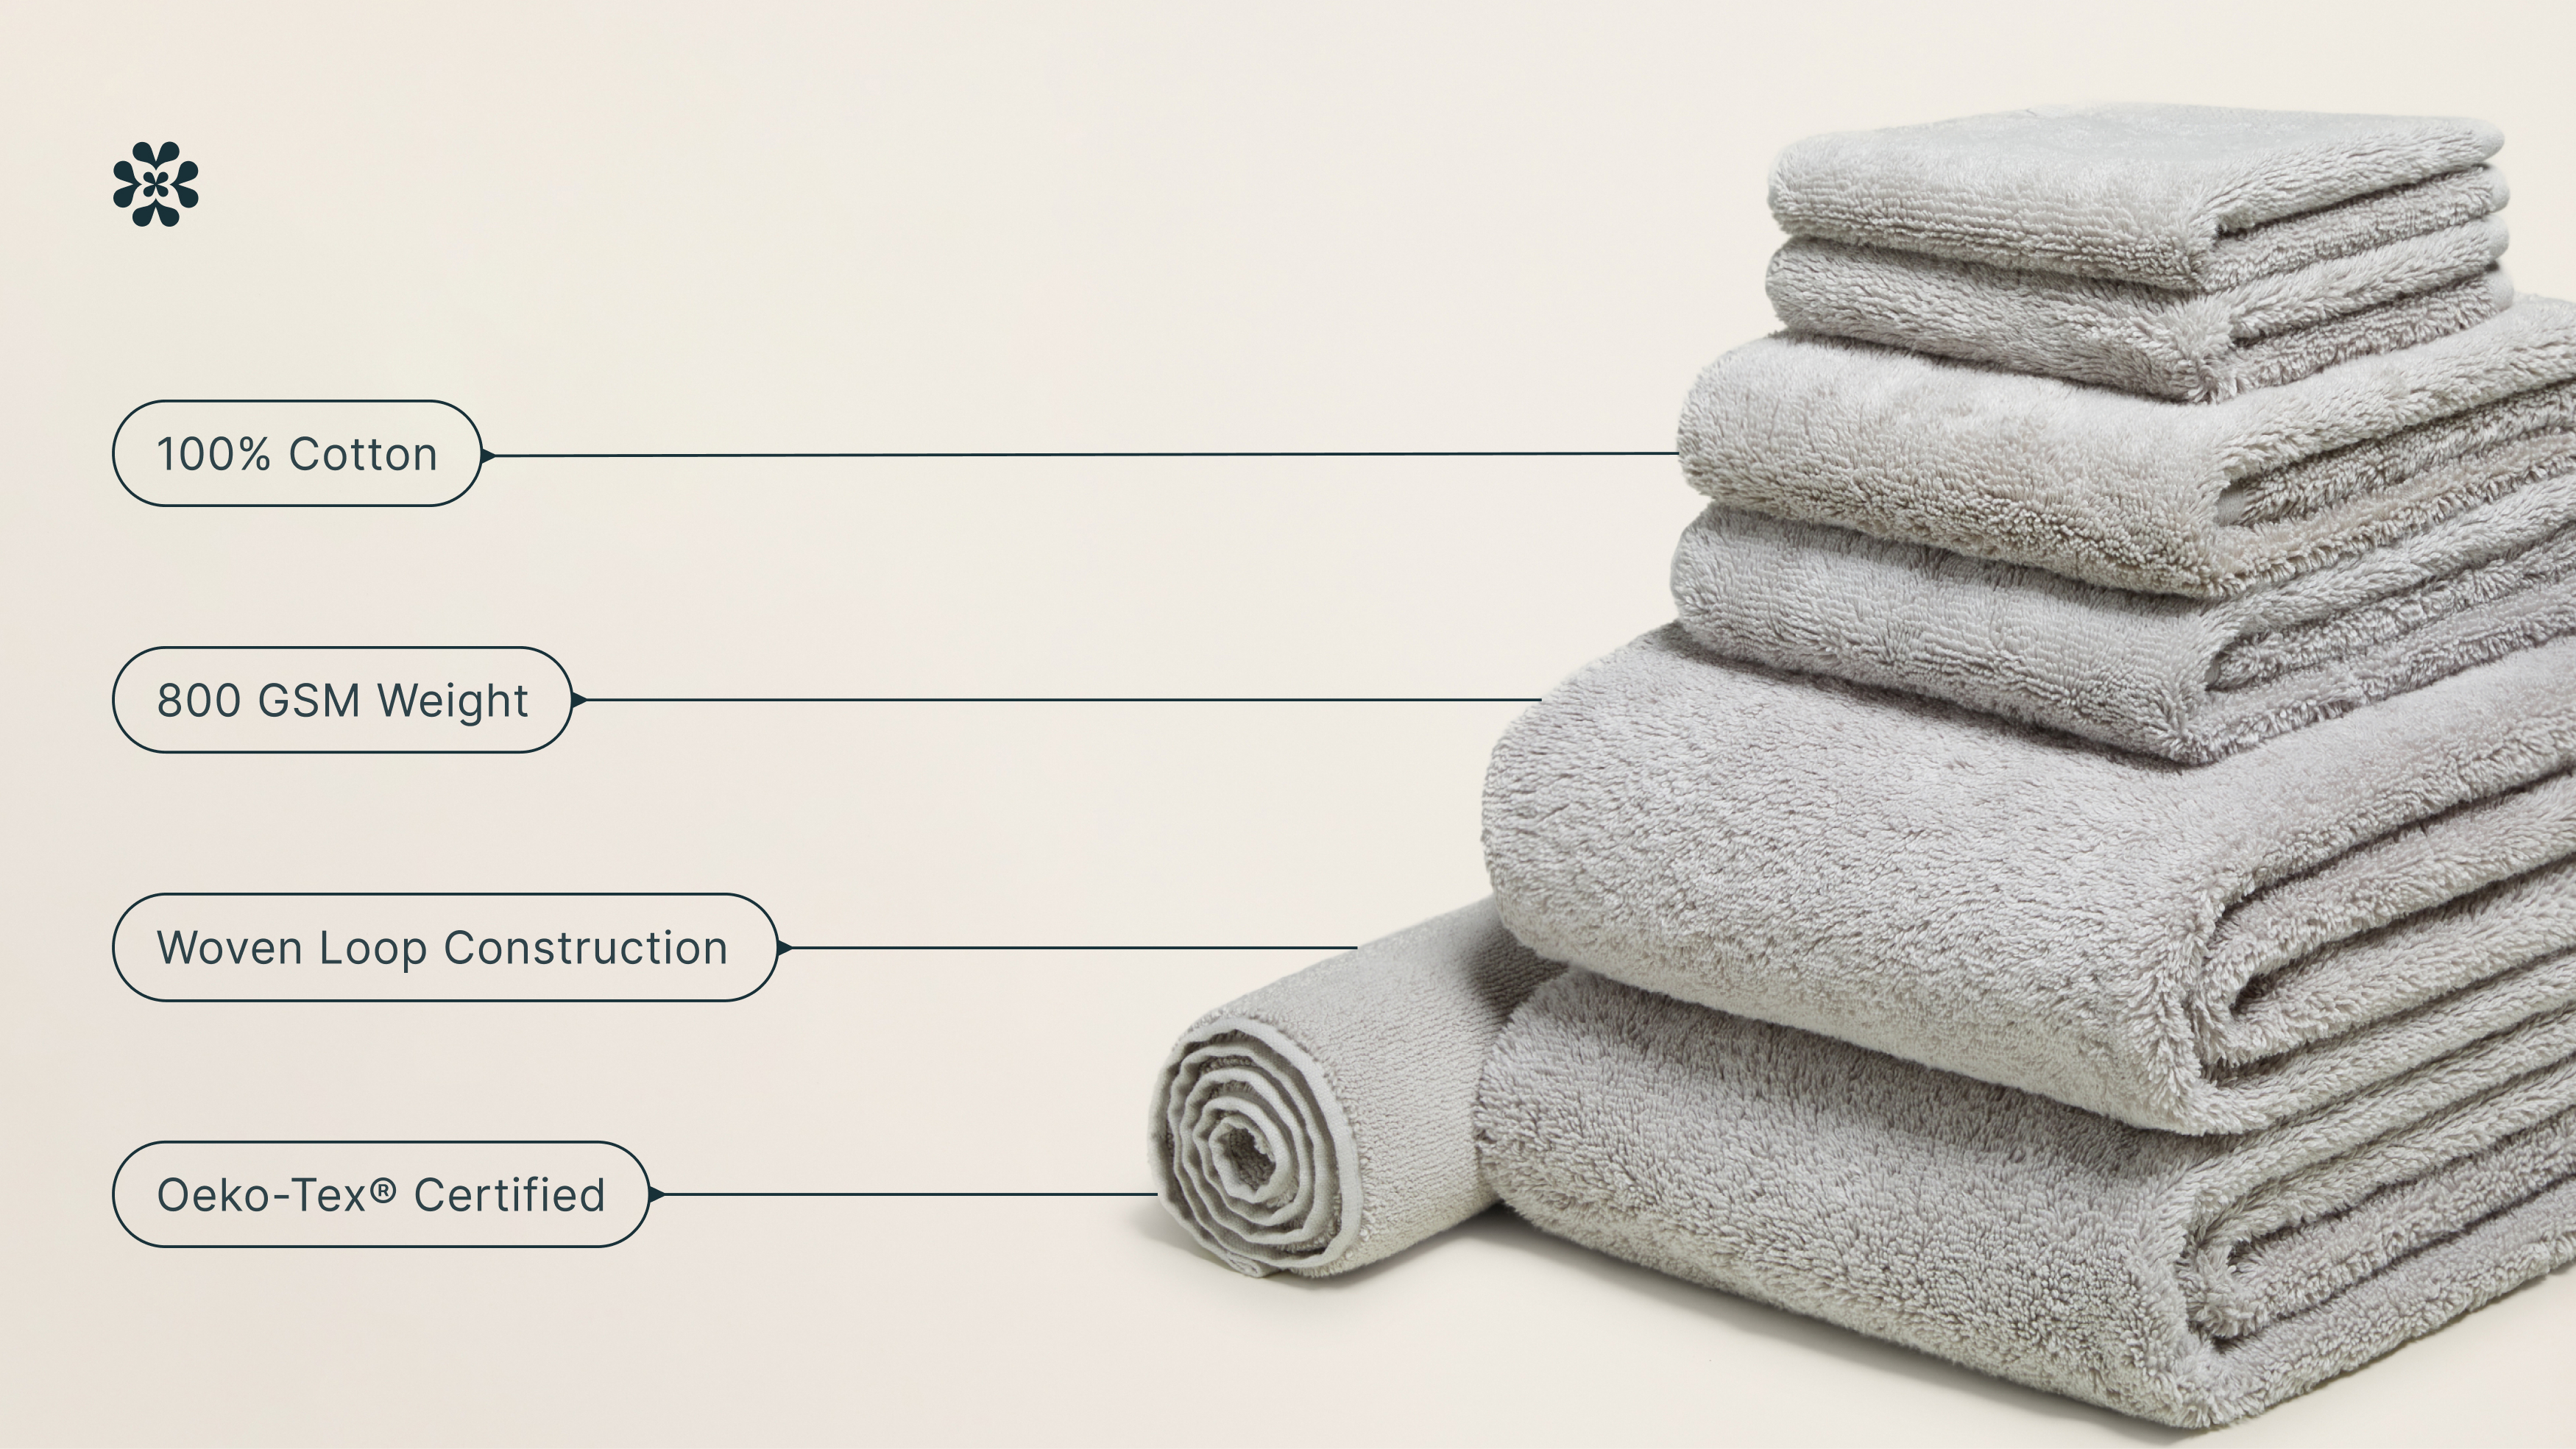 Wholesale Plush White towel with Black Piping Bath Towel Manufacturers &  Suppliers in USA, UK, Australia